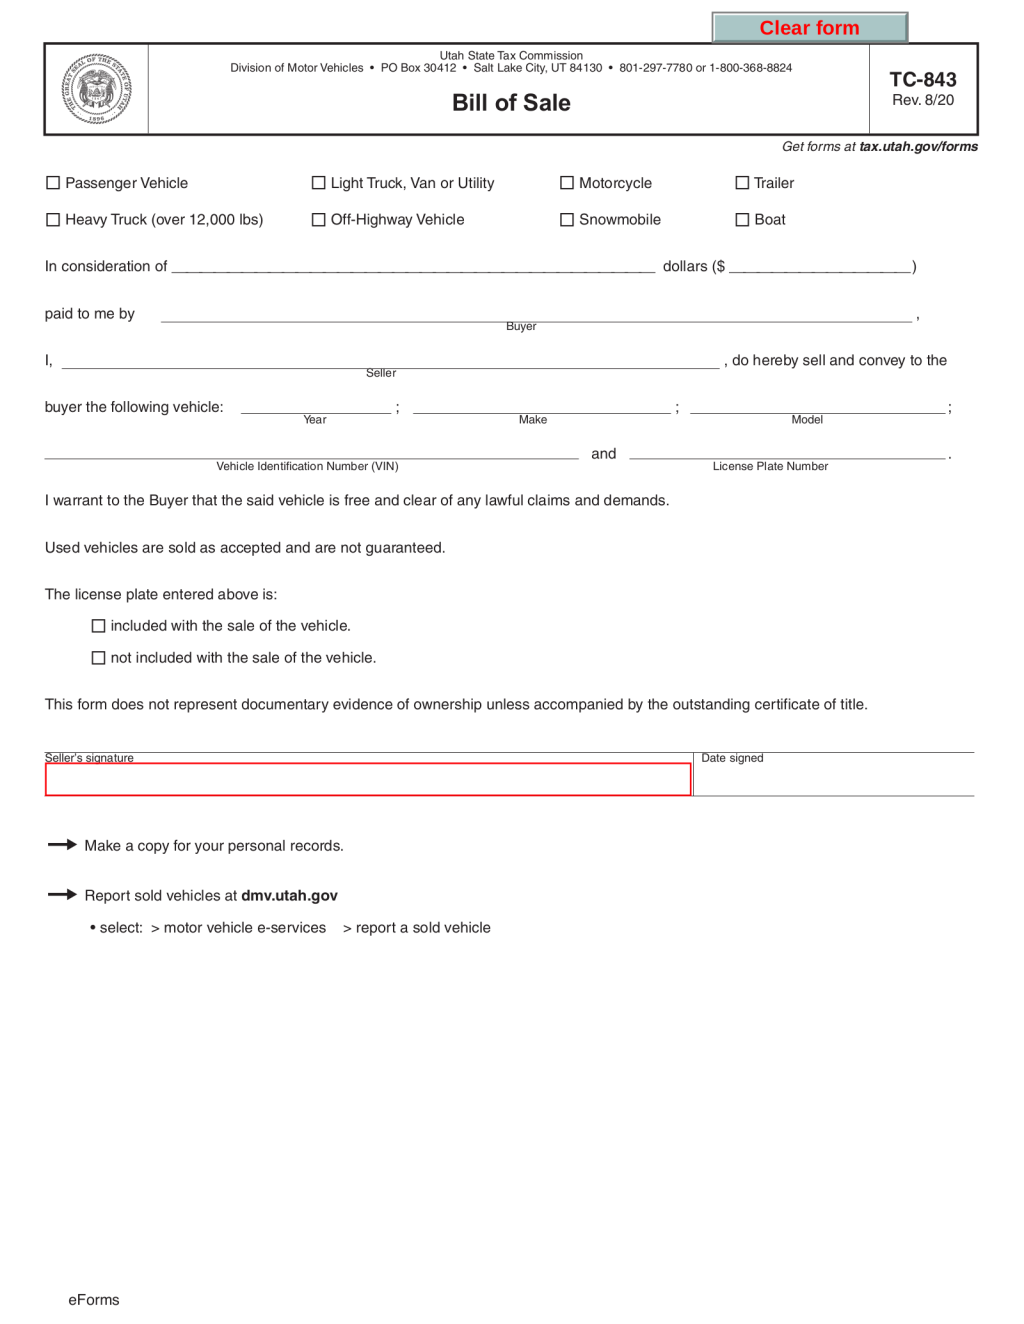 Picture of: Free Utah Motor Vehicle Bill of Sale  Form TC- – PDF – eForms